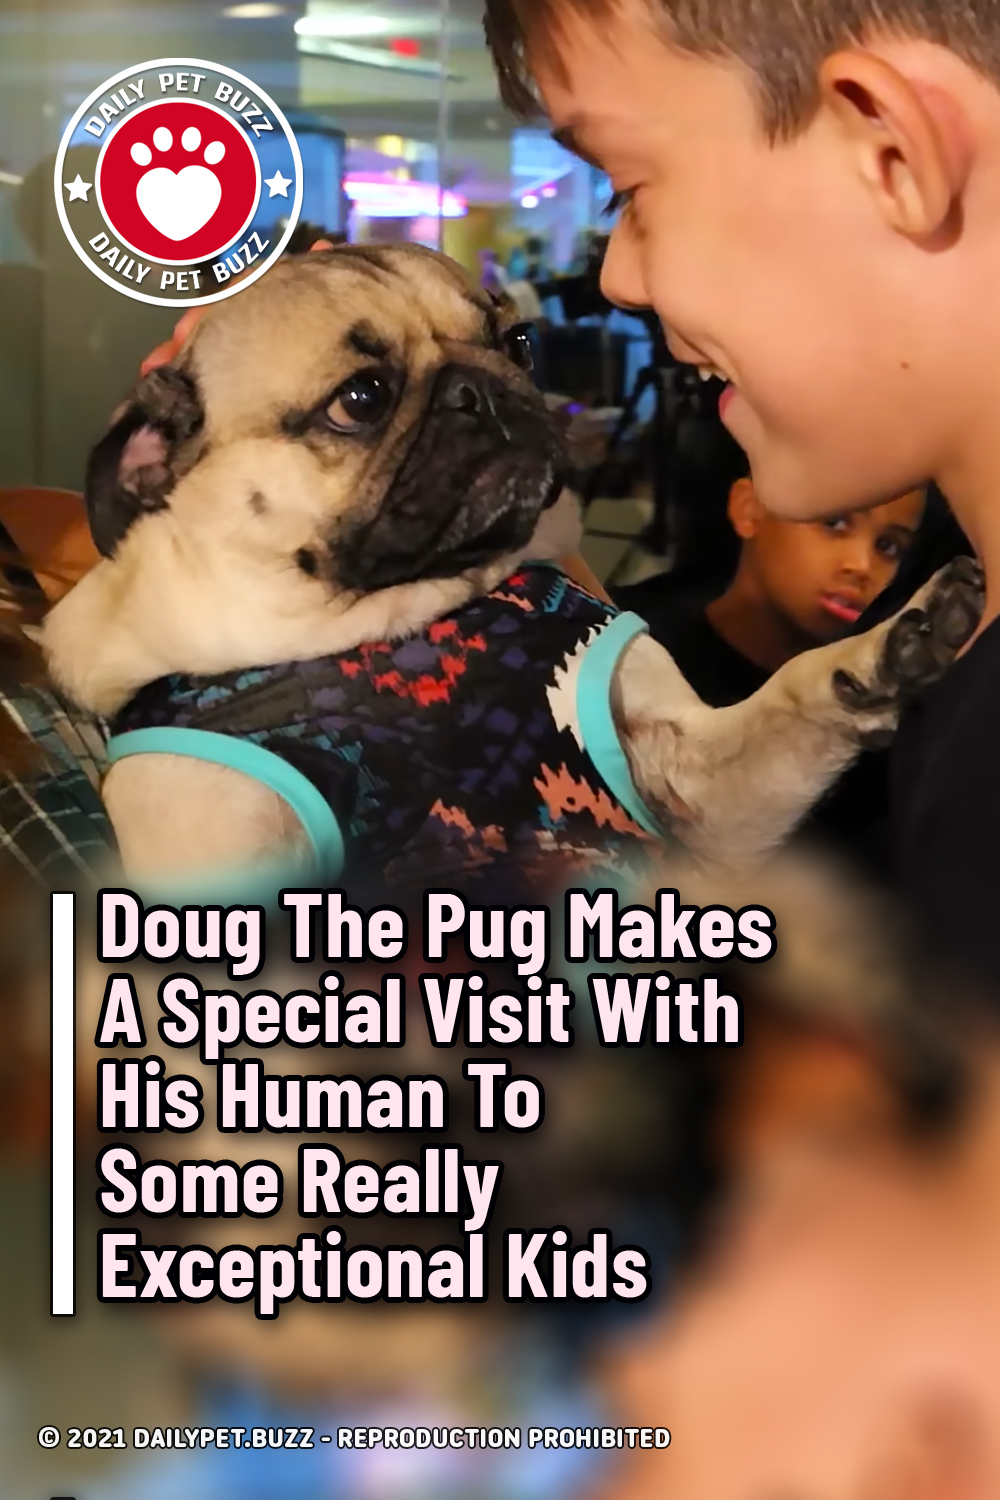 Doug The Pug Makes A Special Visit With His Human To Some Really Exceptional Kids